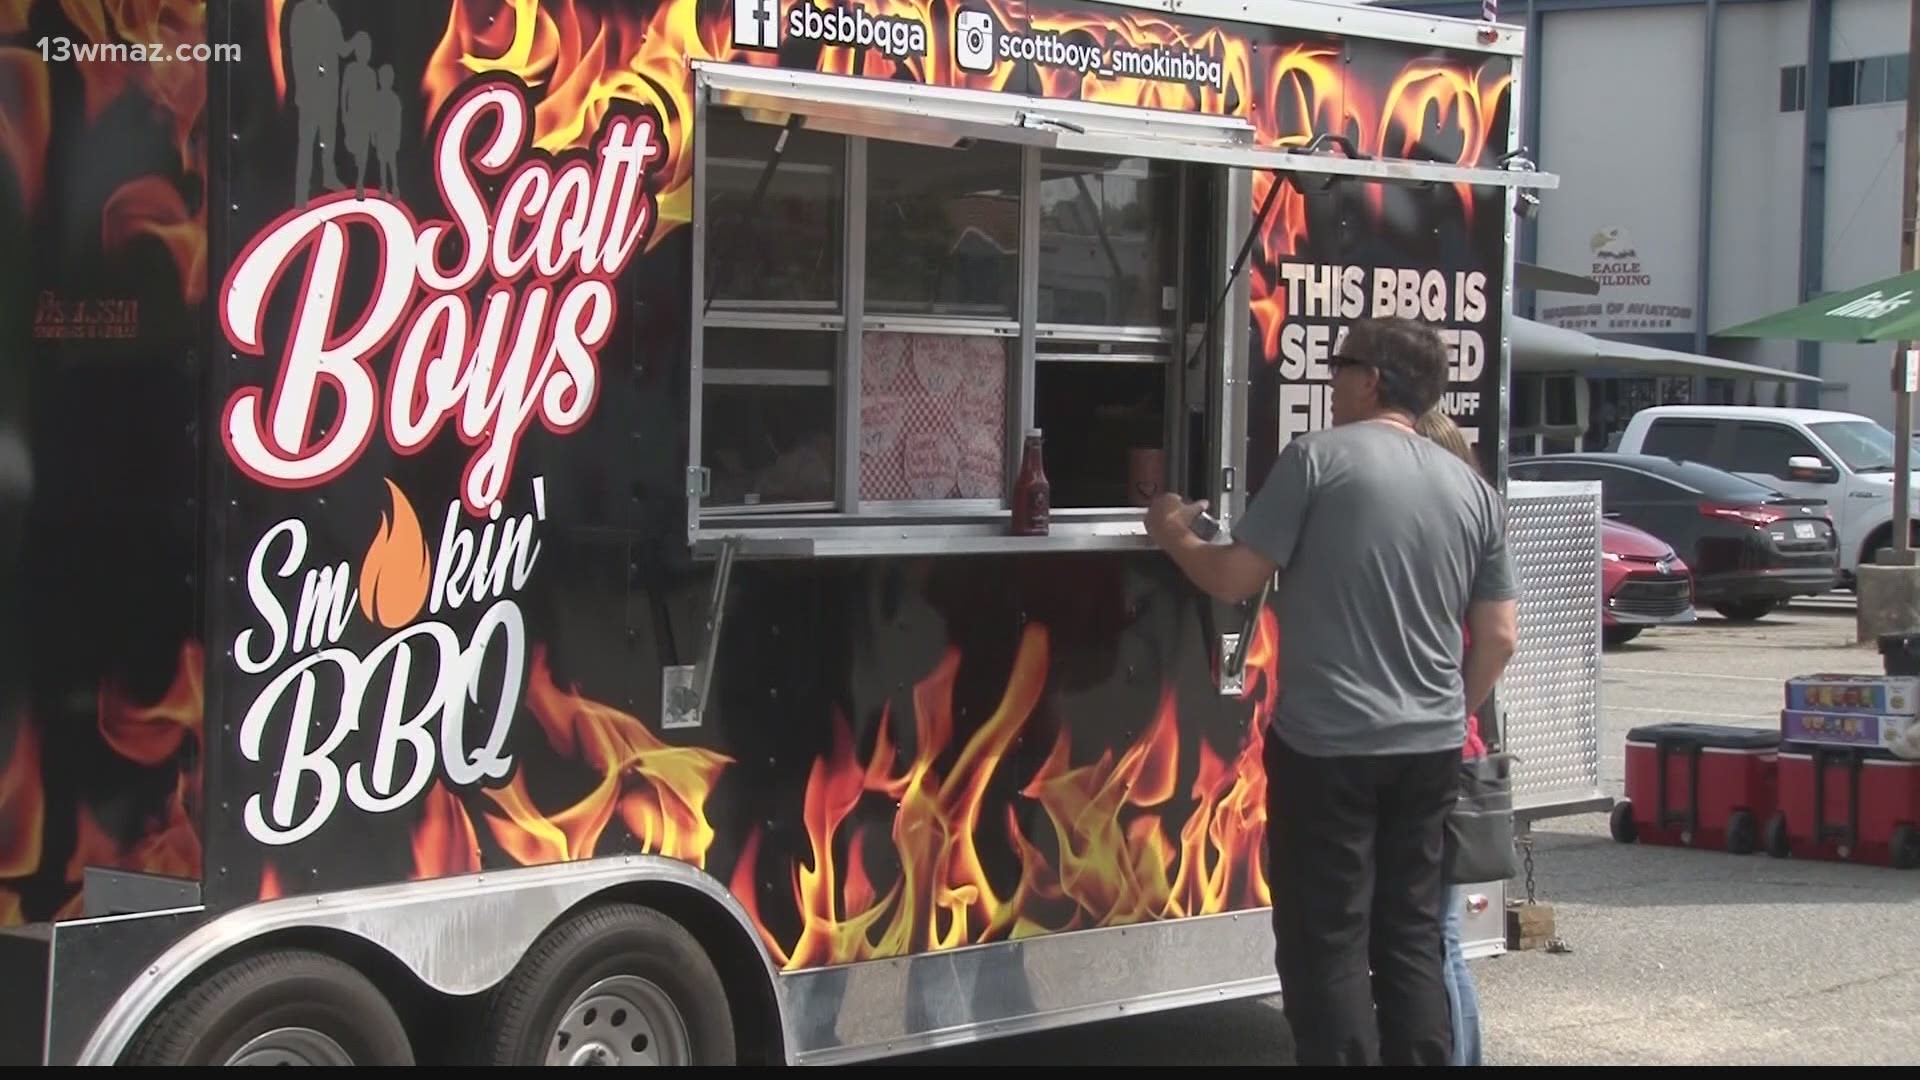 City of Perry to host 1st Food Truck Friday in 2 years